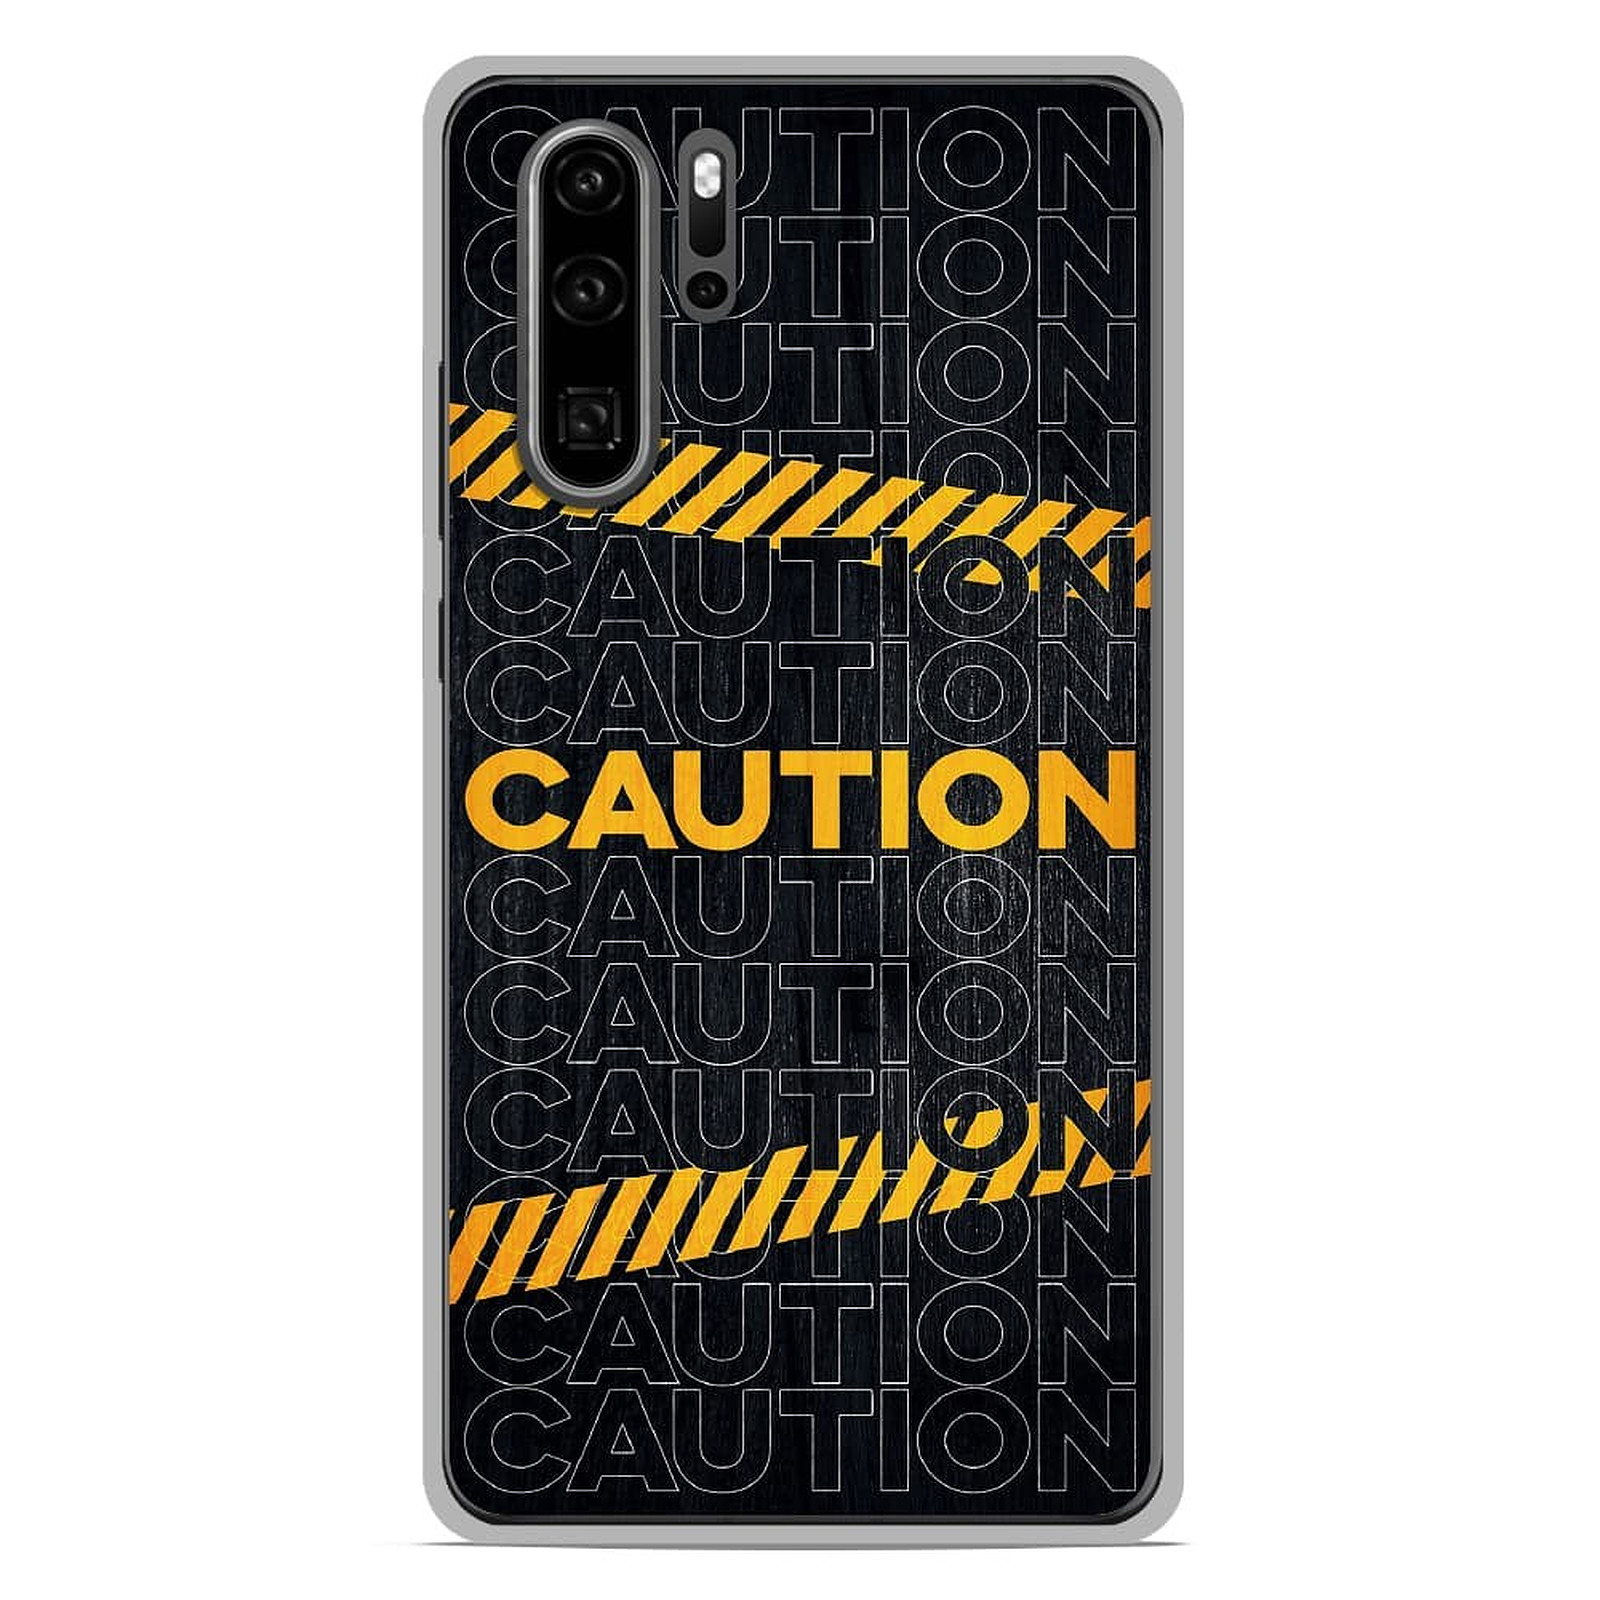 1001 Coques Coque silicone gel Huawei P30 Pro motif Caution - Coque telephone 1001Coques